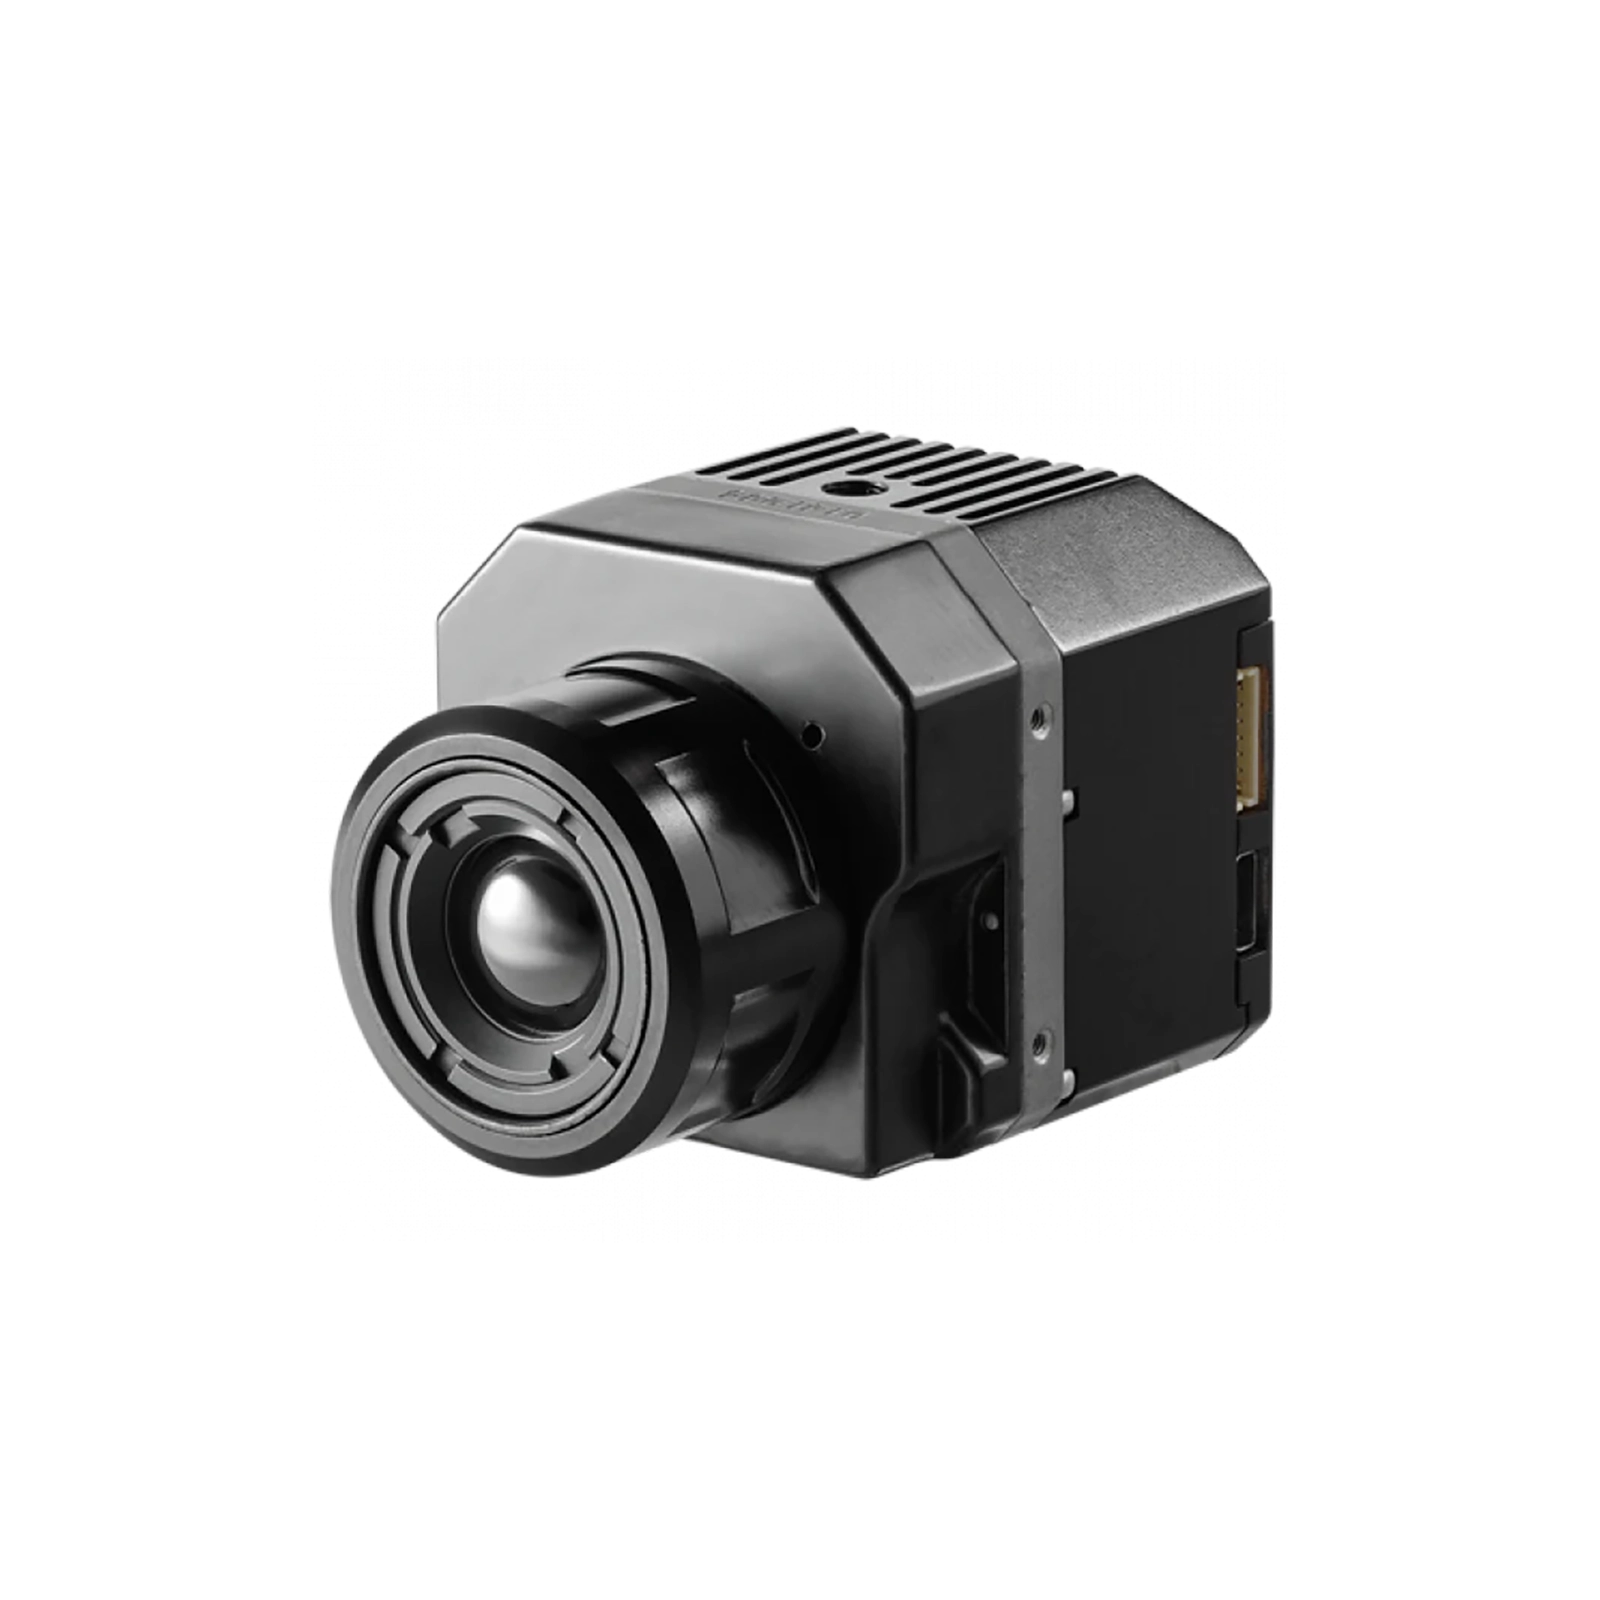 FLIR VUE PRO 336 Thermal Camera For Drone - 336 x 256 Thermal Imaging & Data Recording 6.8mm 9mm 13mm 25° 35° 44° 9HZ 30HZ